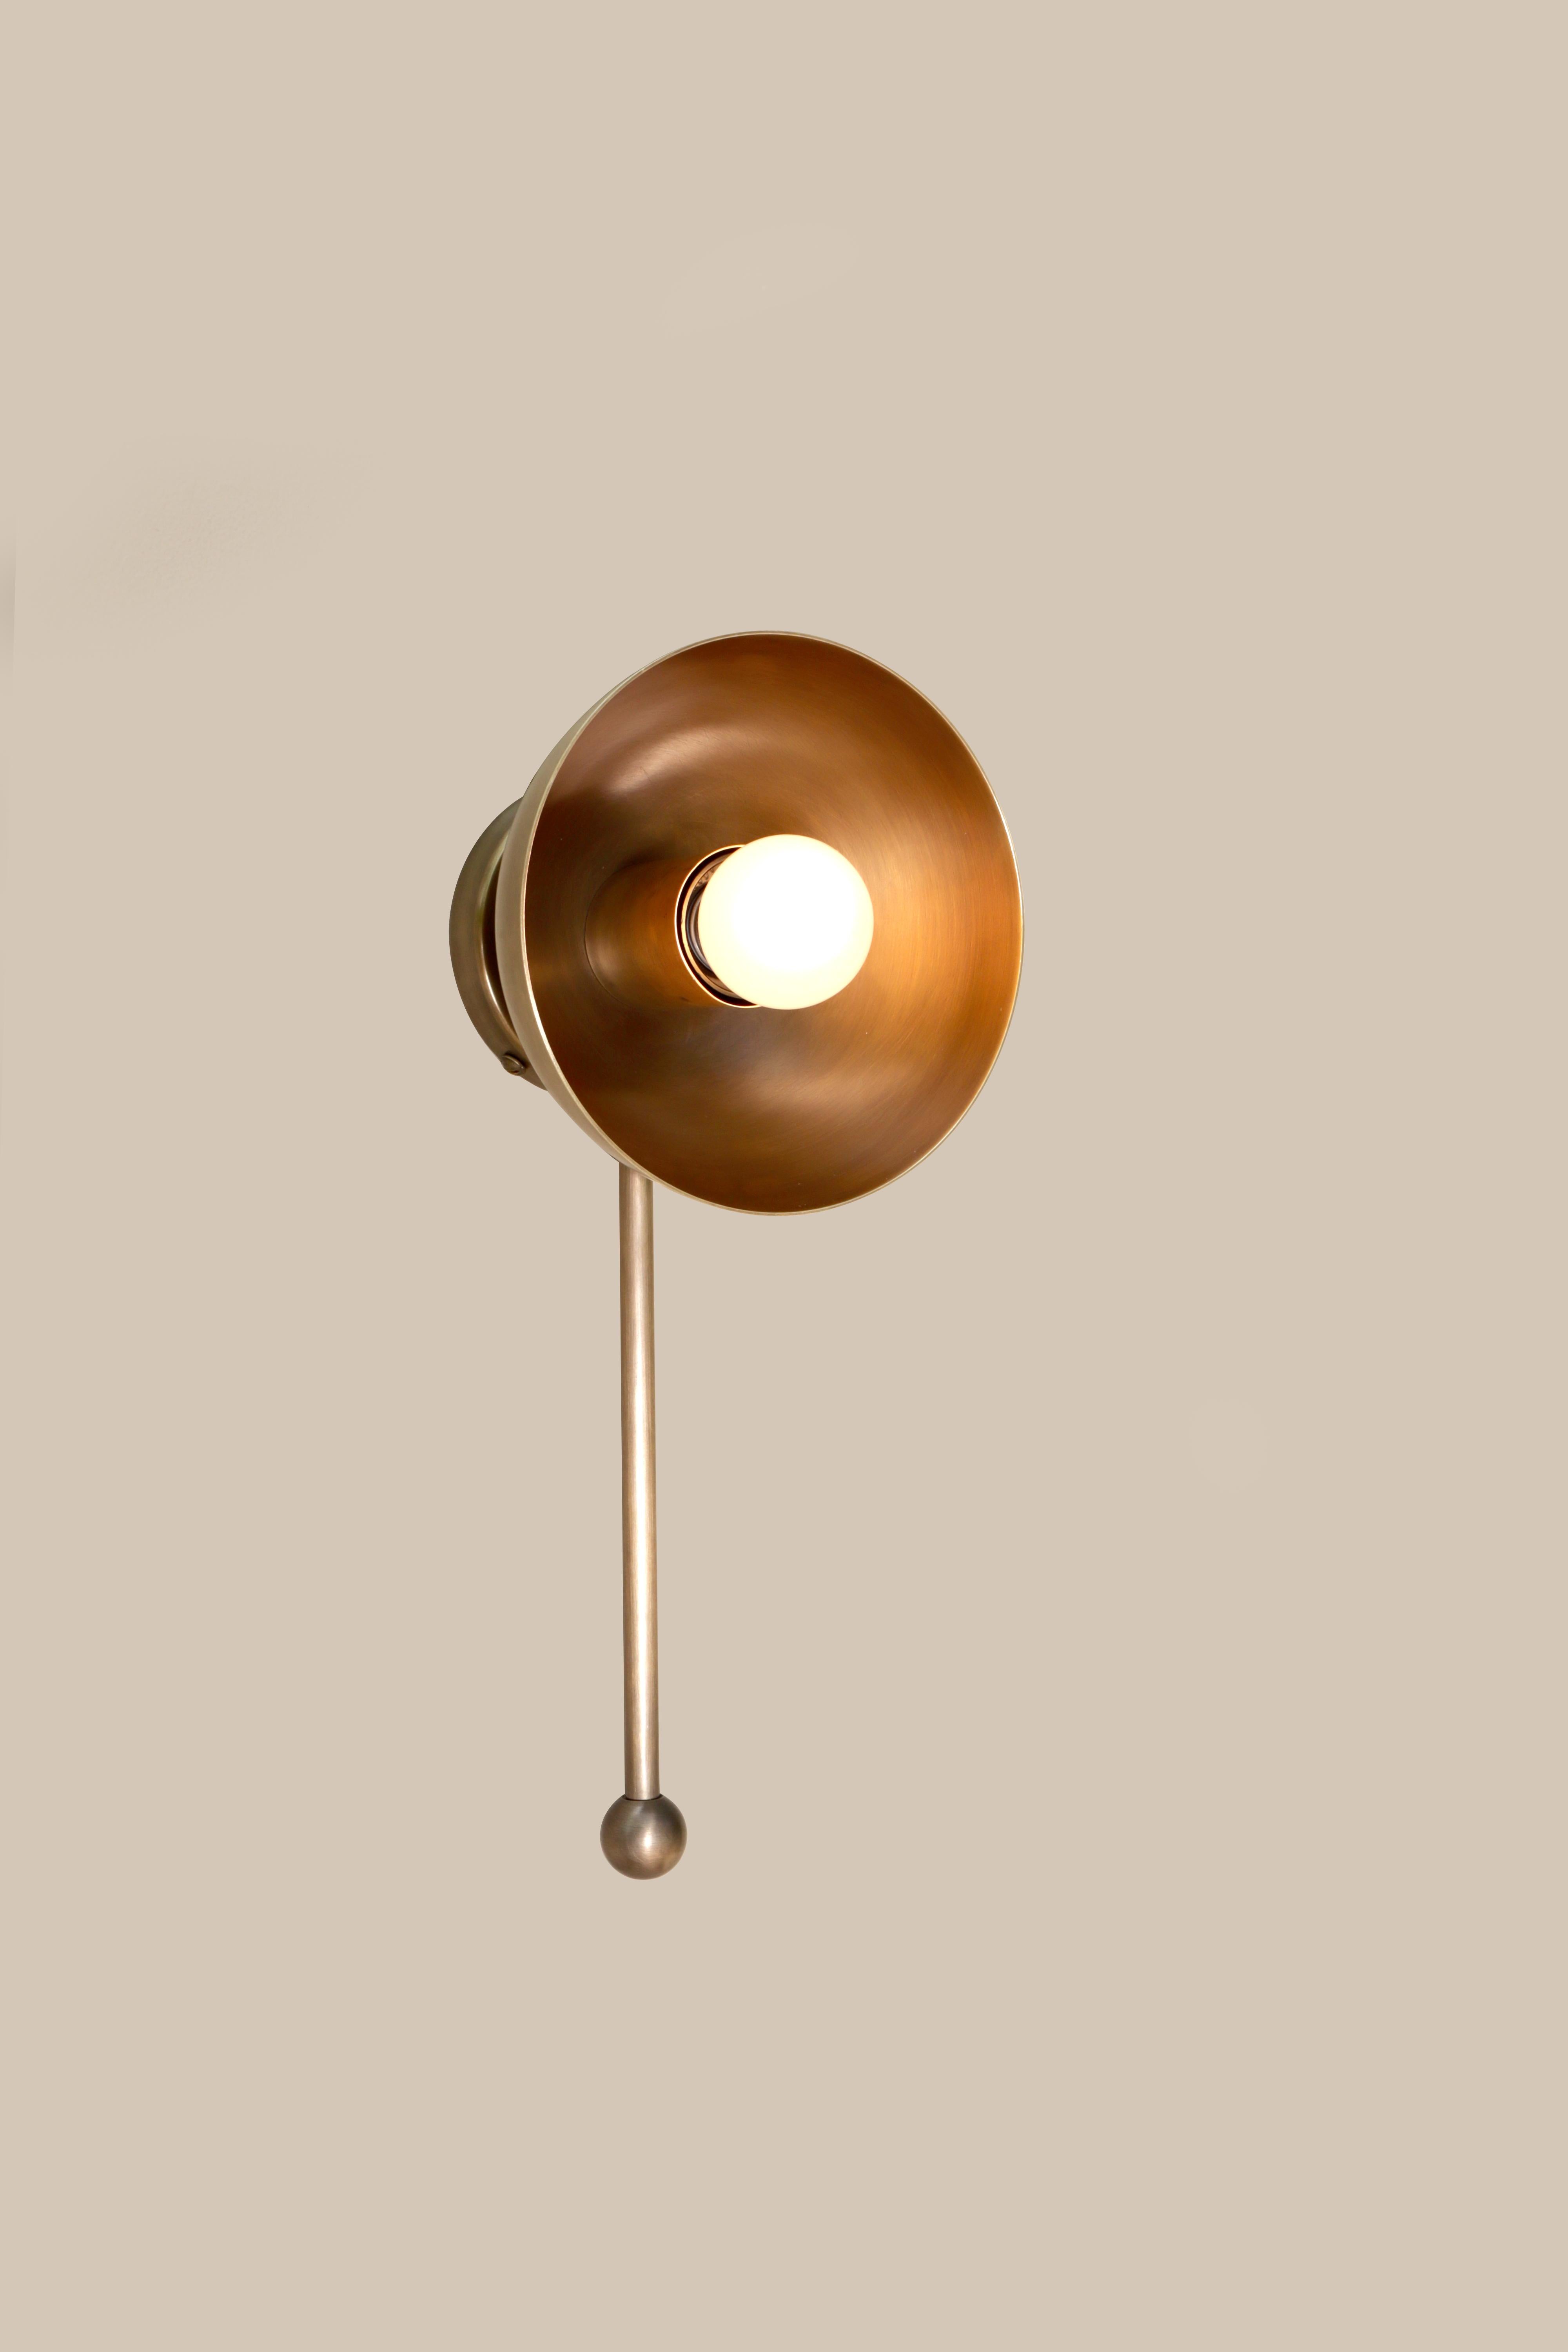 Small Drop Brass Wall Sconce by Lamp Shaper
Dimensions: D 15.5 x W 15.5 x H 30.5 cm.
Materials: Brass.

Different finishes available: raw brass, aged brass, burnt brass and brushed brass Please contact us.

All our lamps can be wired according to